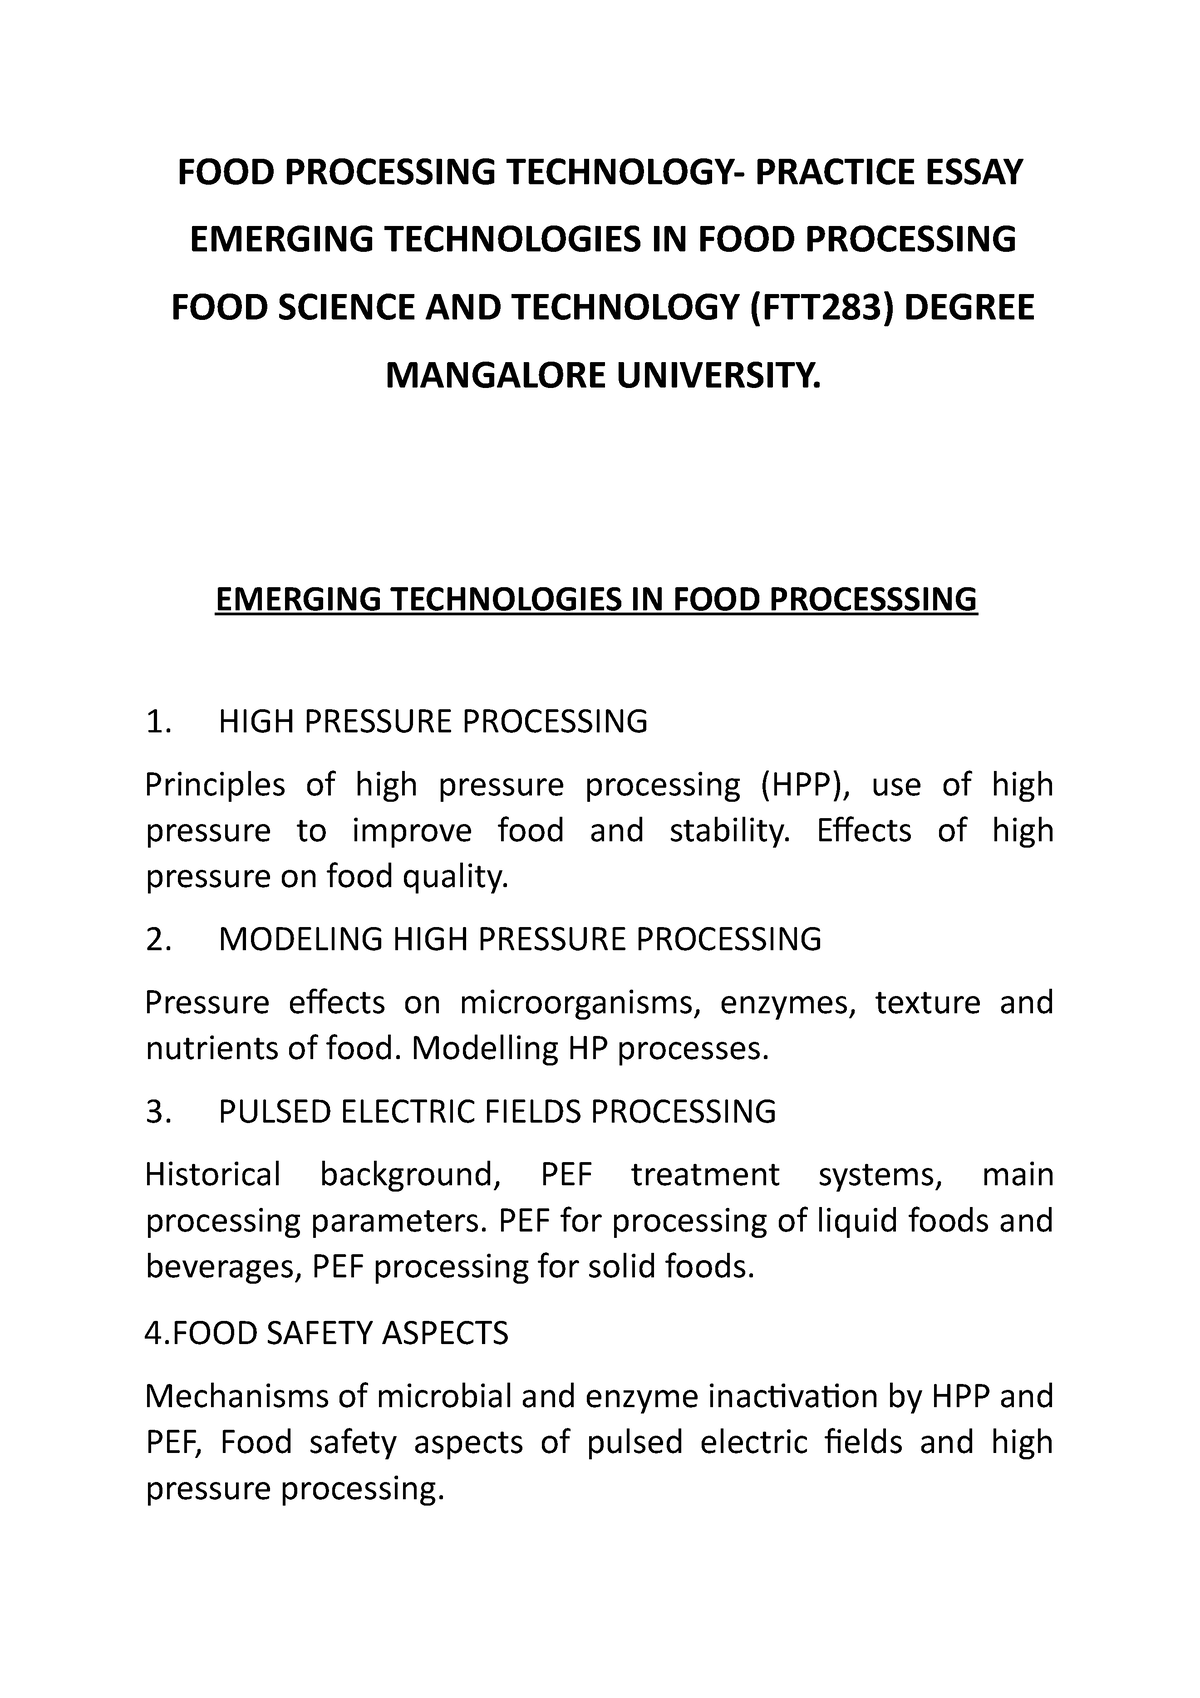 thesis in food technology